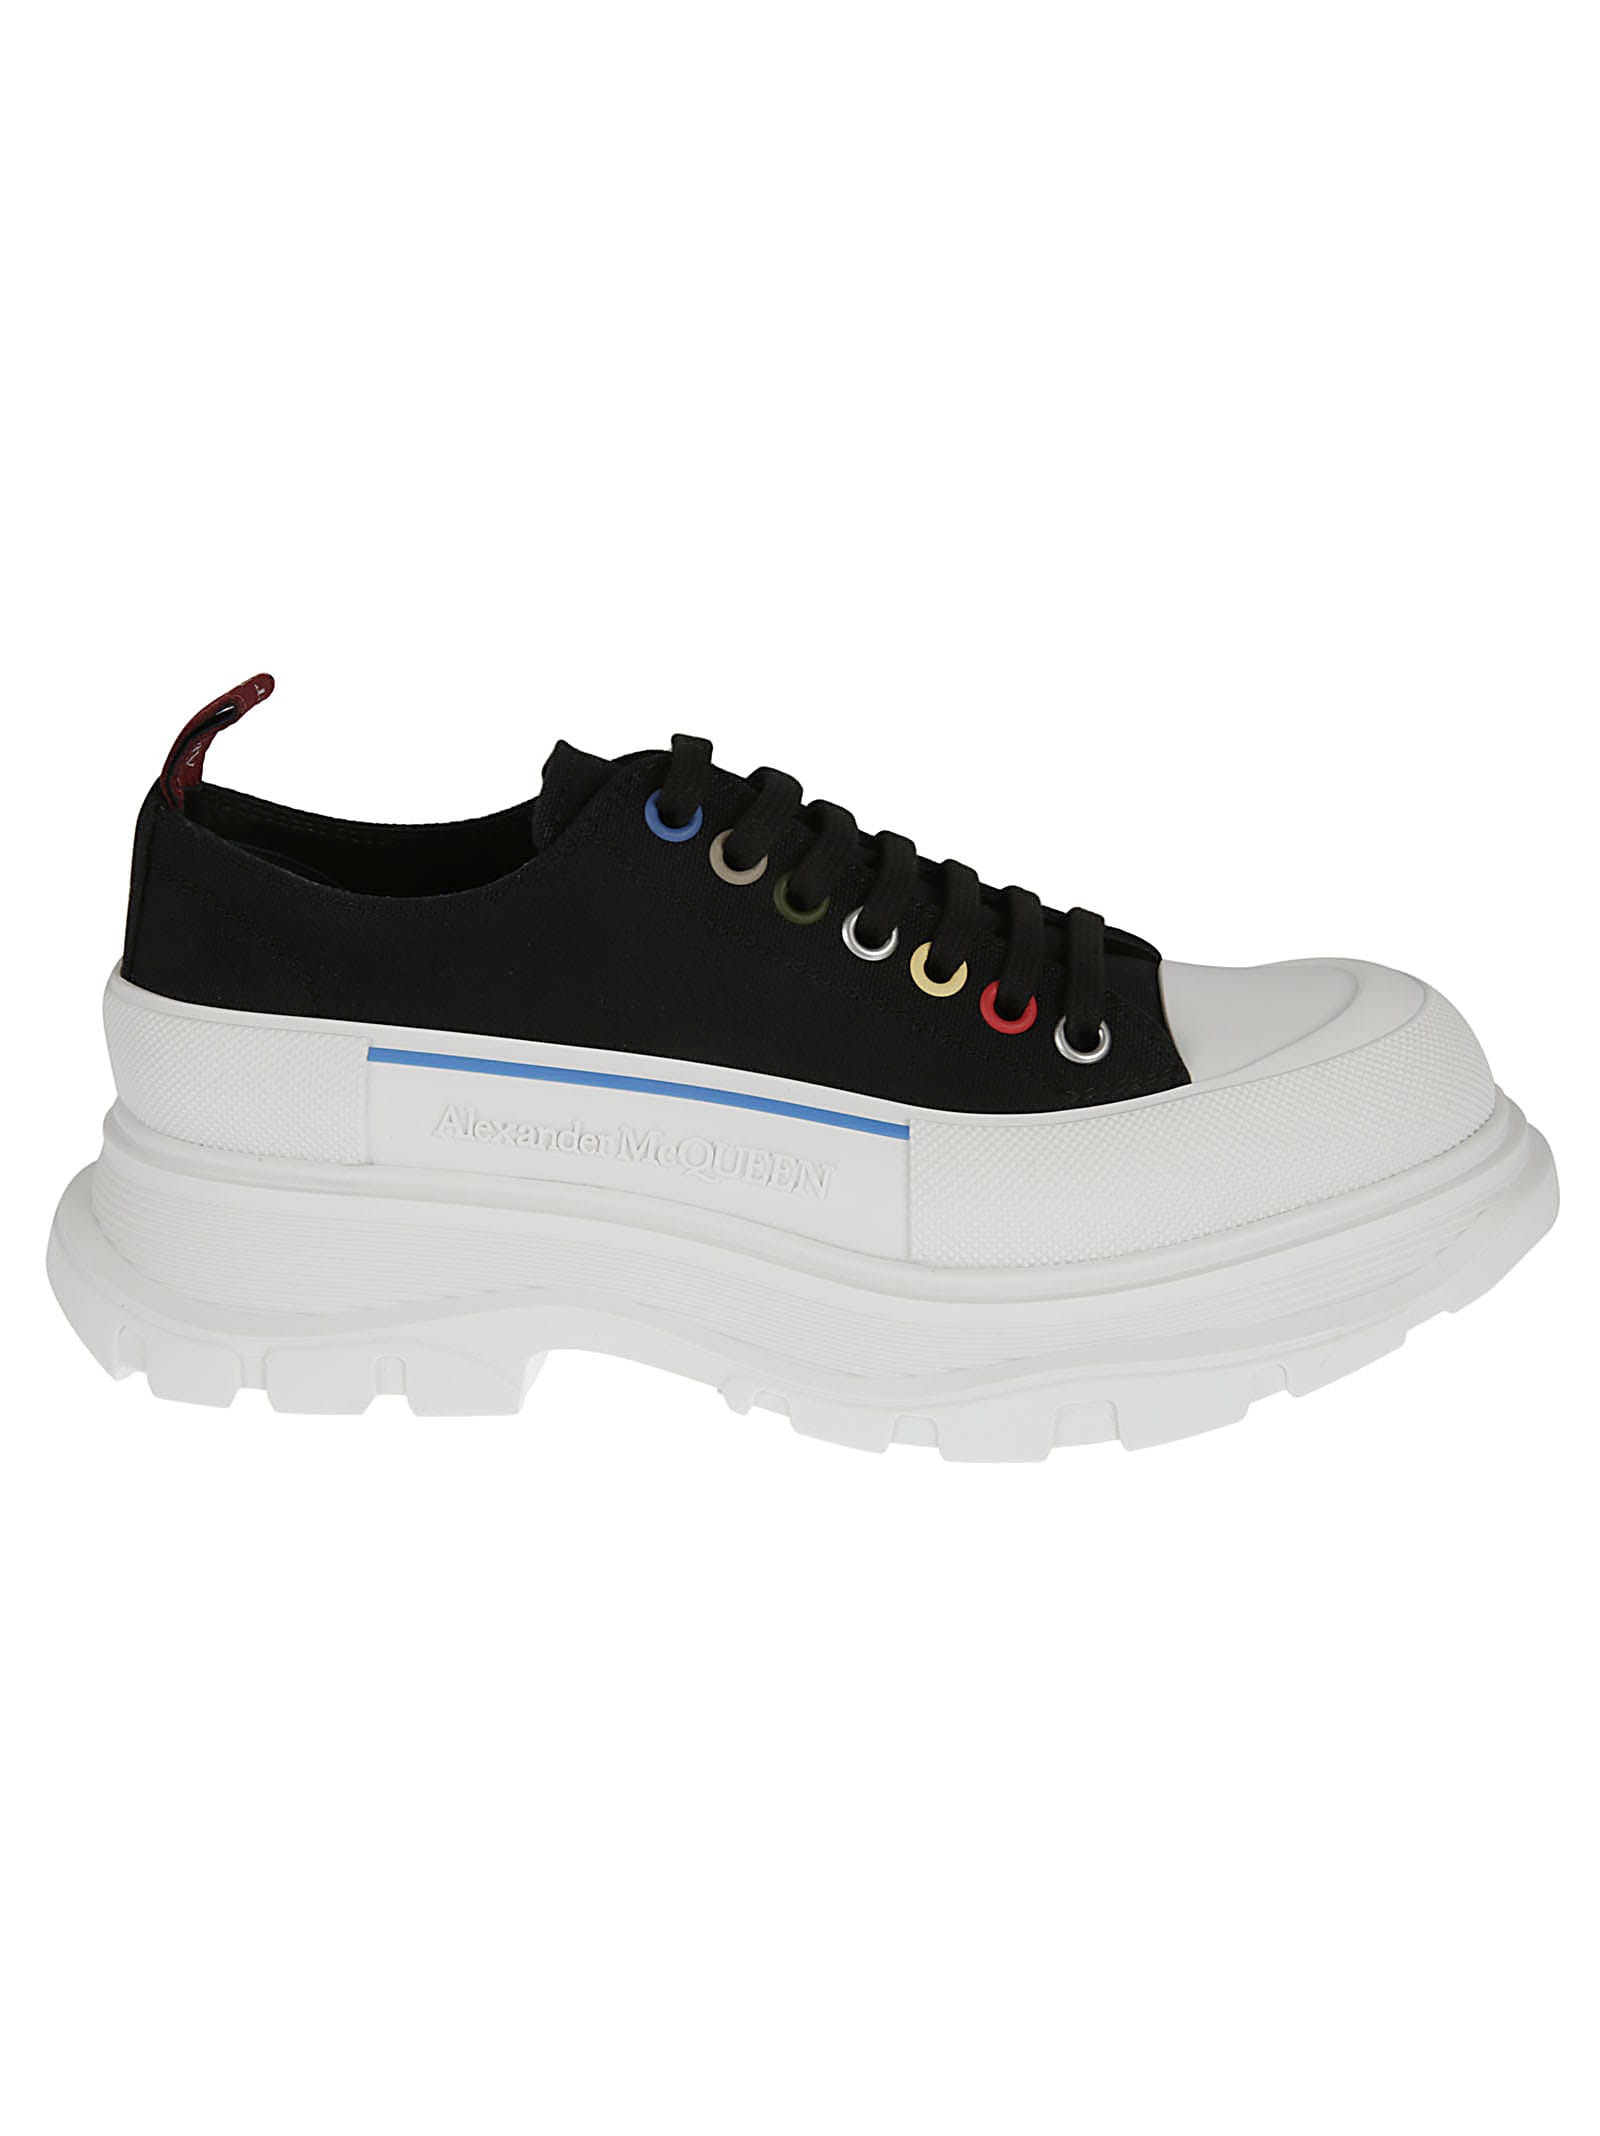 Alexander McQueen Canvas Sack Lace-up Sneakers